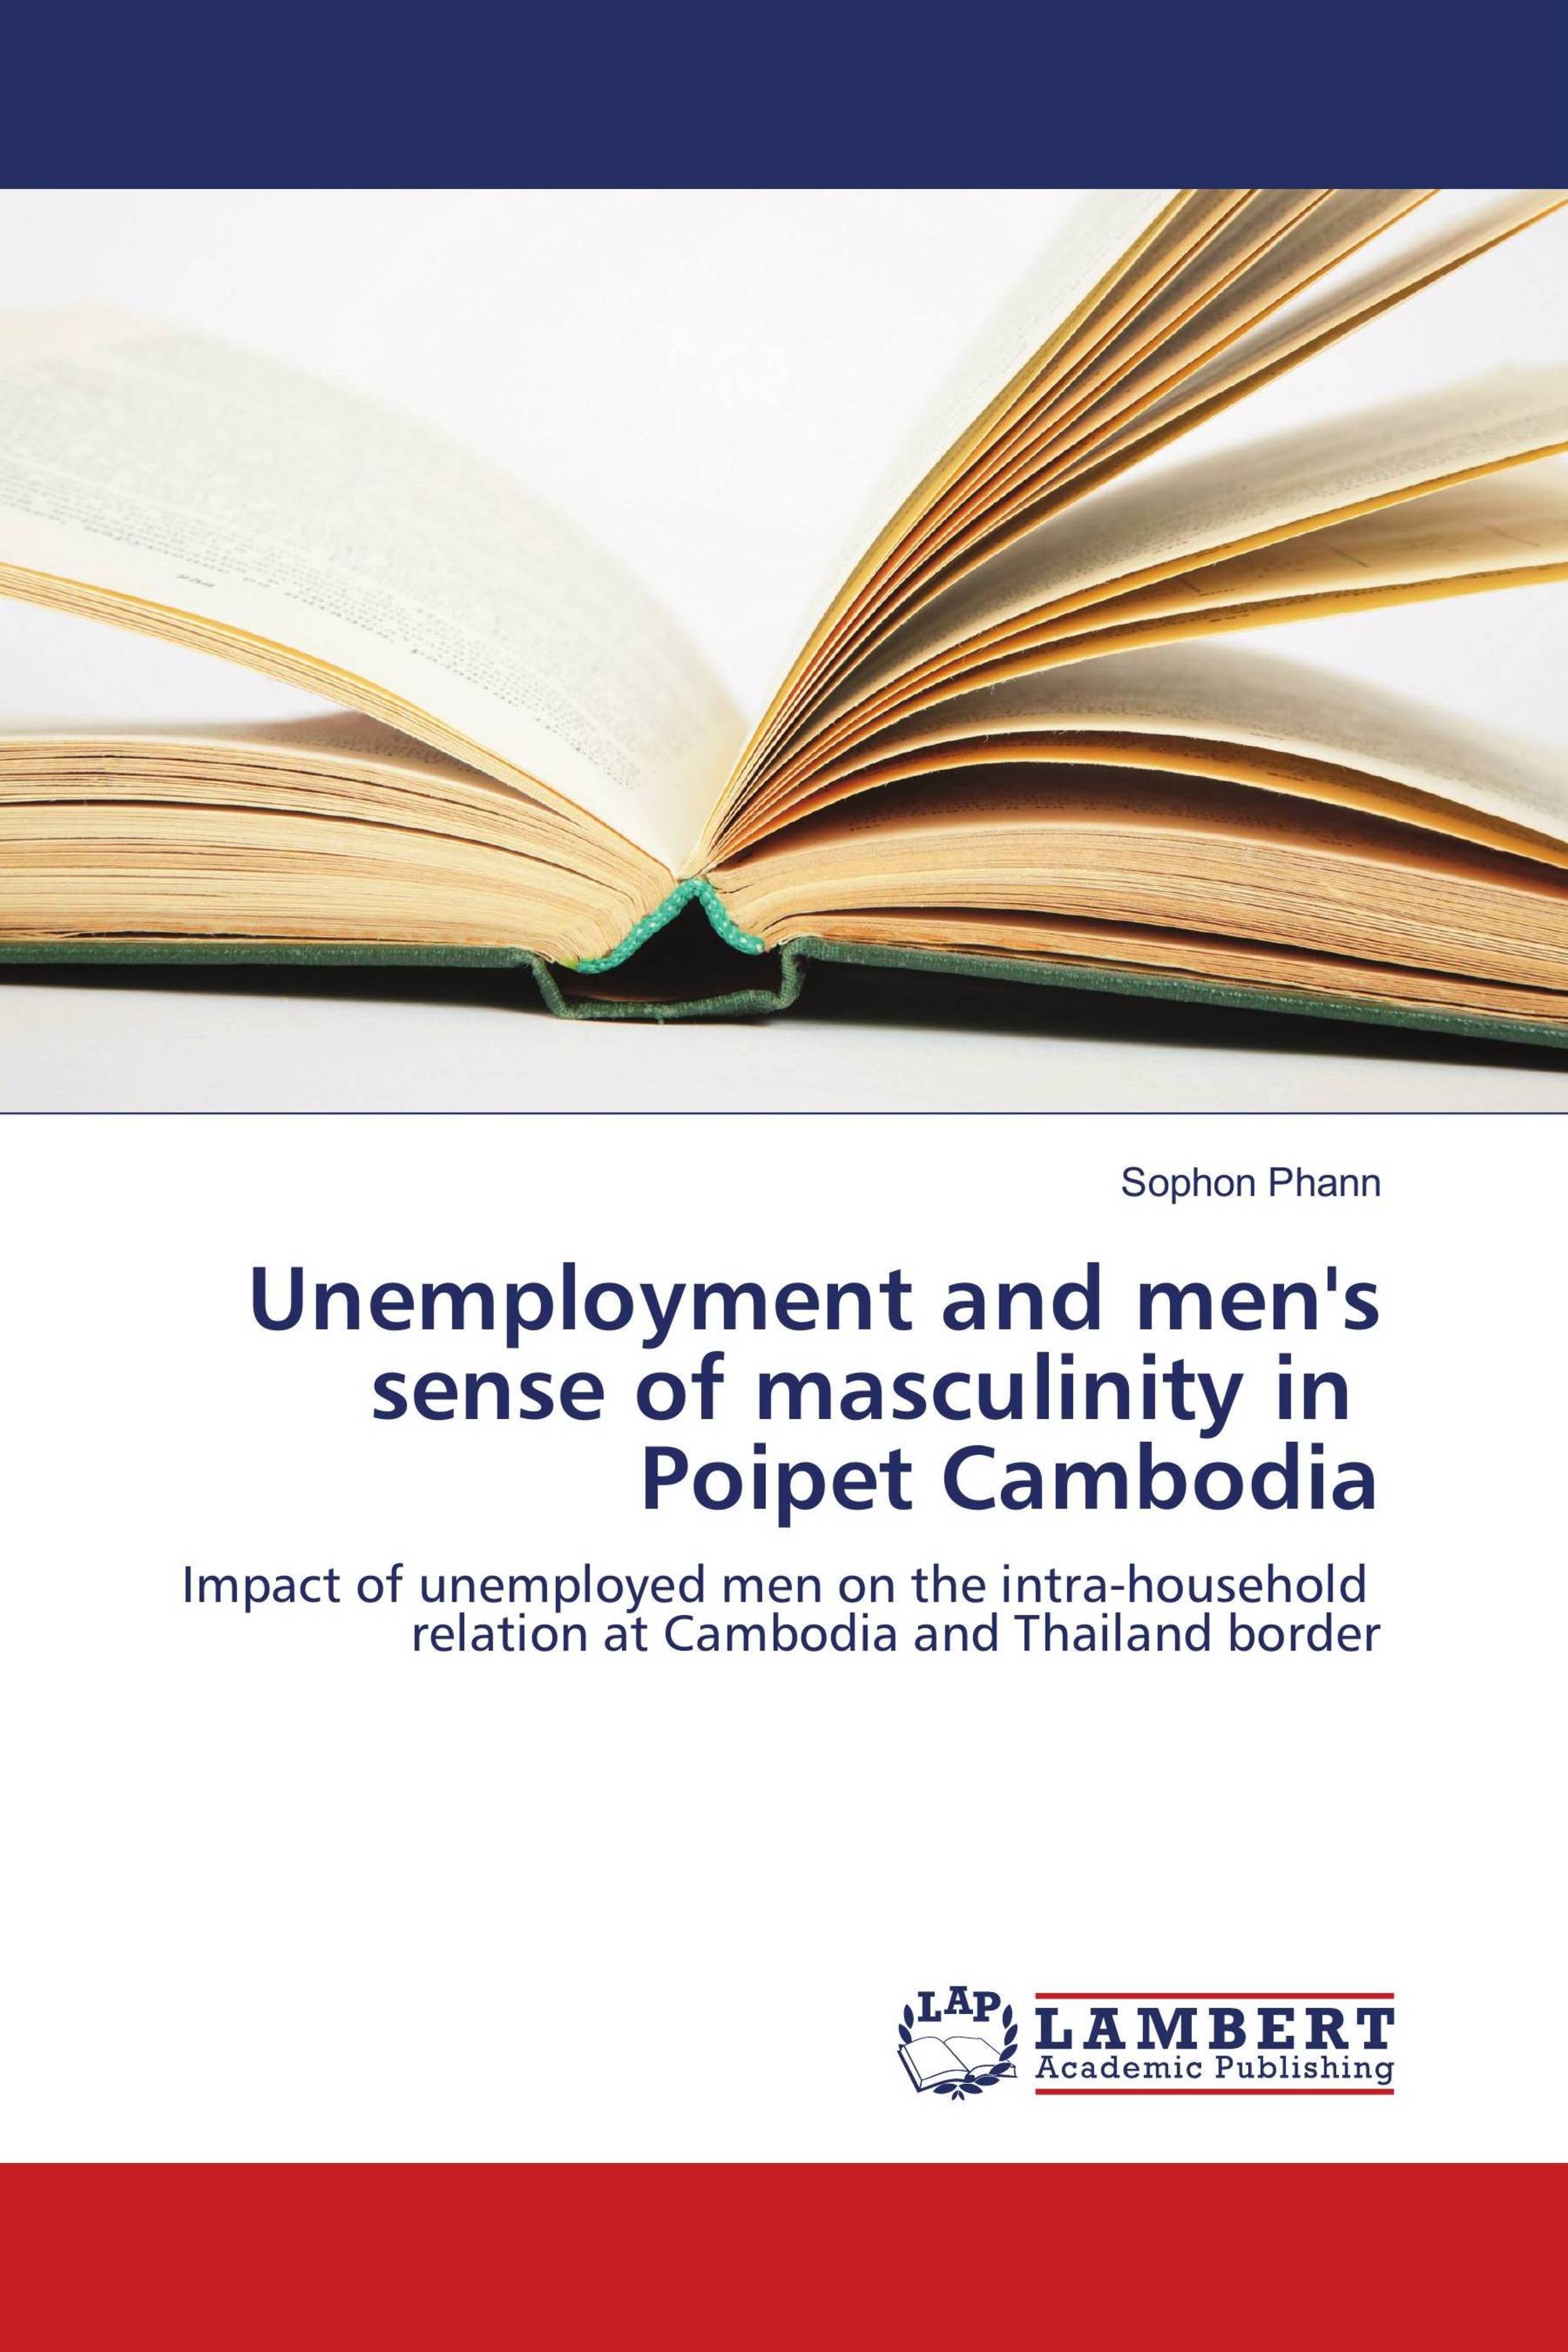 Unemployment and men's sense of masculinity in Poipet Cambodia